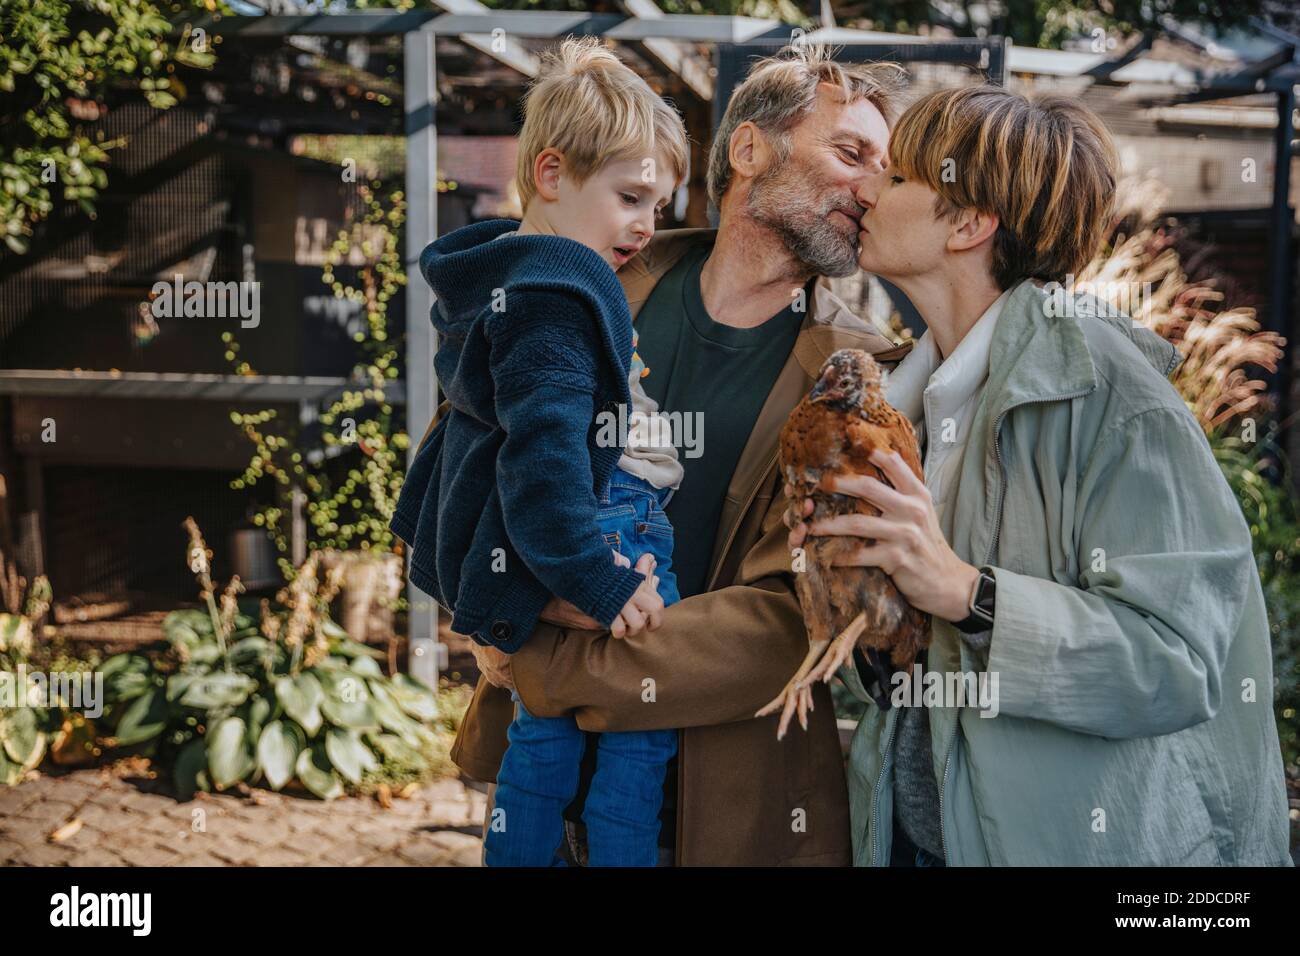 Family with chicken coop standing in back yard Stock Photo